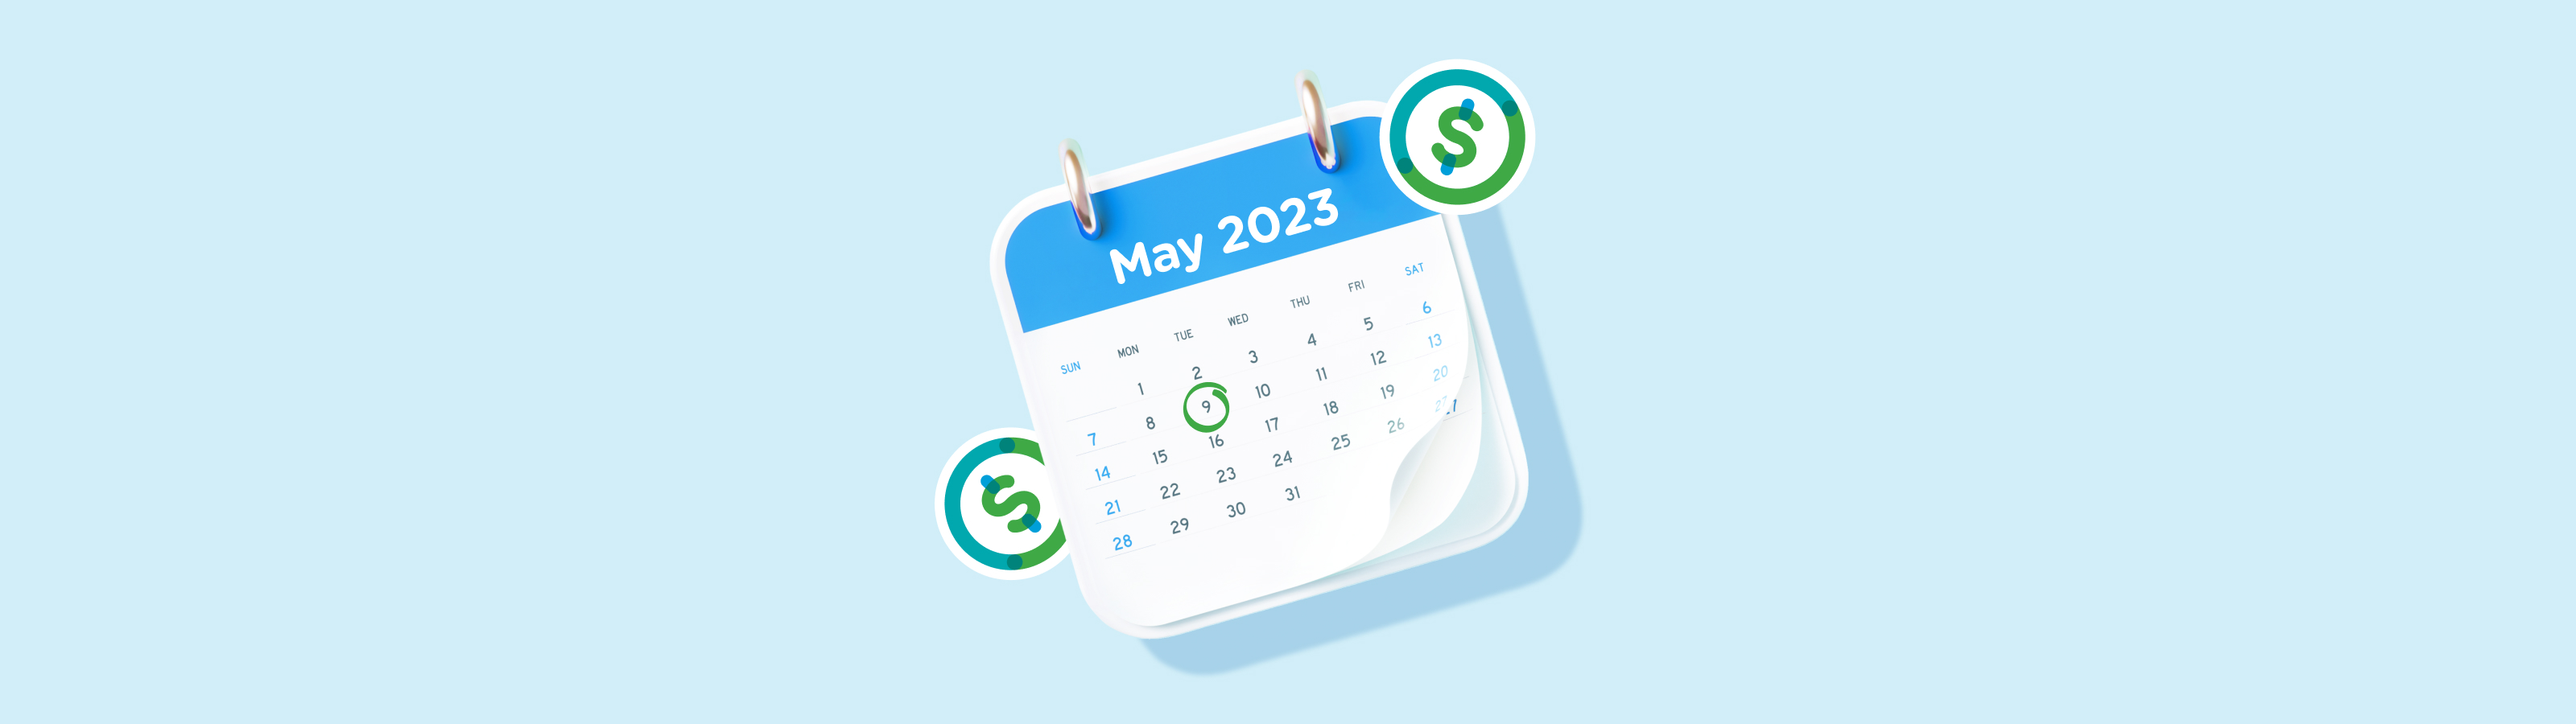 May 9 2023, the date of the 2023 Federal Budget circled on a calendar